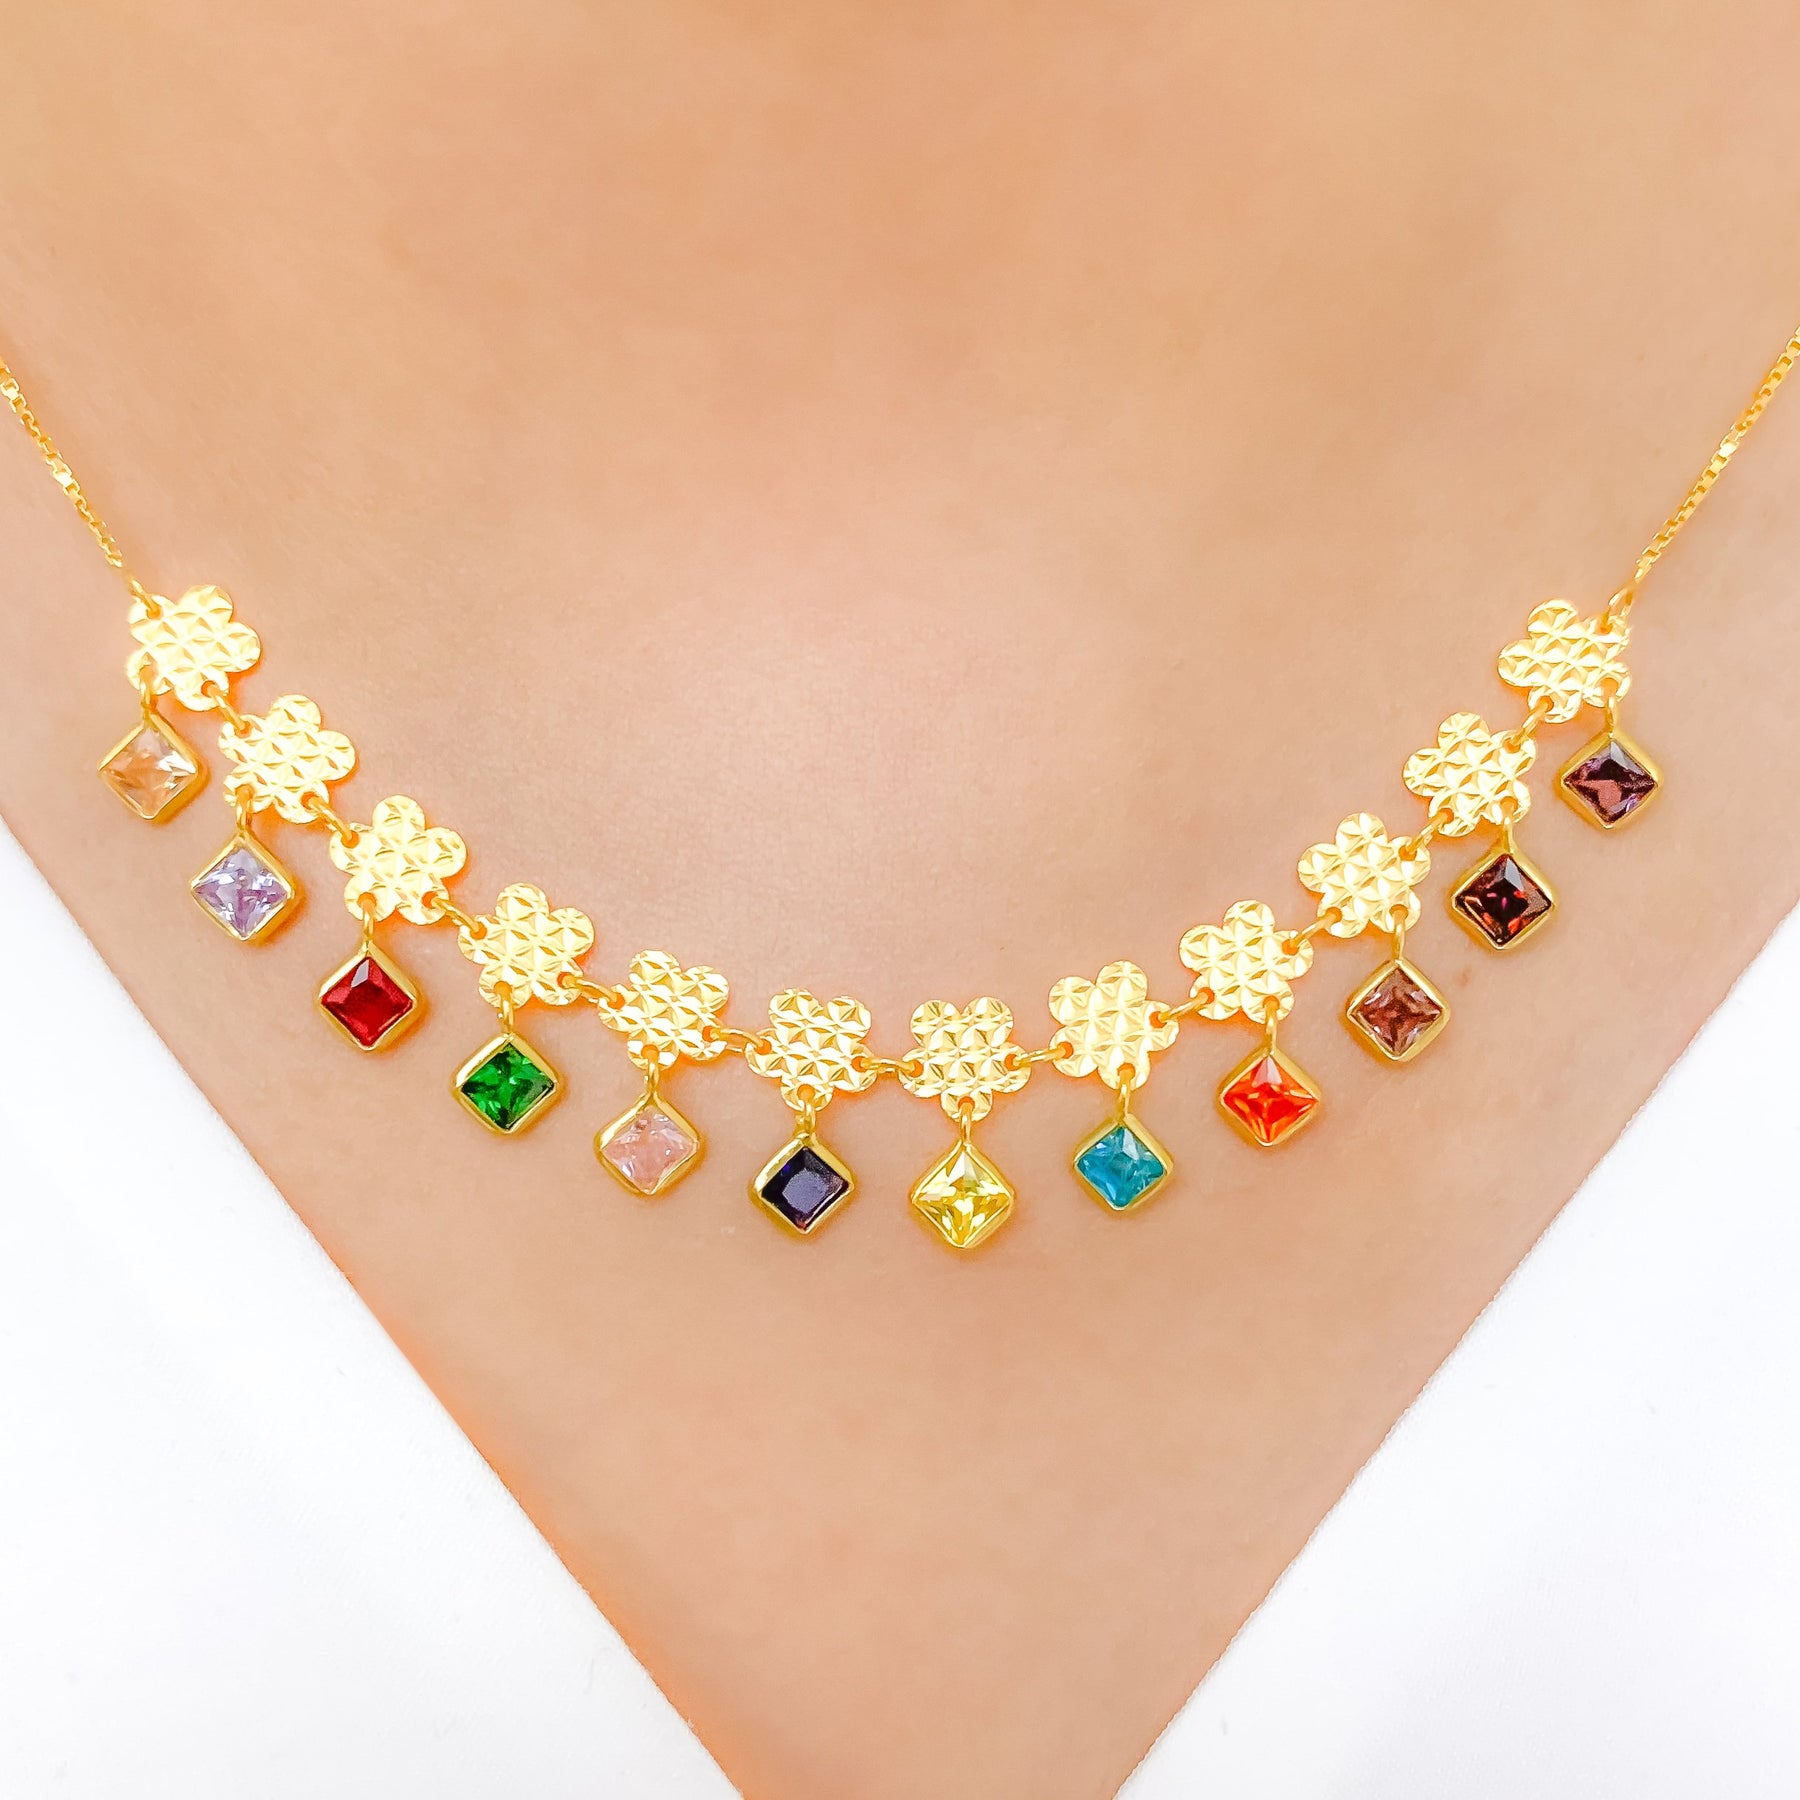 Amazon.com: Planch Gold Colorful Gemstone Necklace Women: Cute Sparkly Multicolor  Stone Crystal Strand Wedding Chain Choker - Dainty Trendy Party Summer  Beach Jewelry Gifts for Women Girls Mom Bridal (10-2): Clothing, Shoes